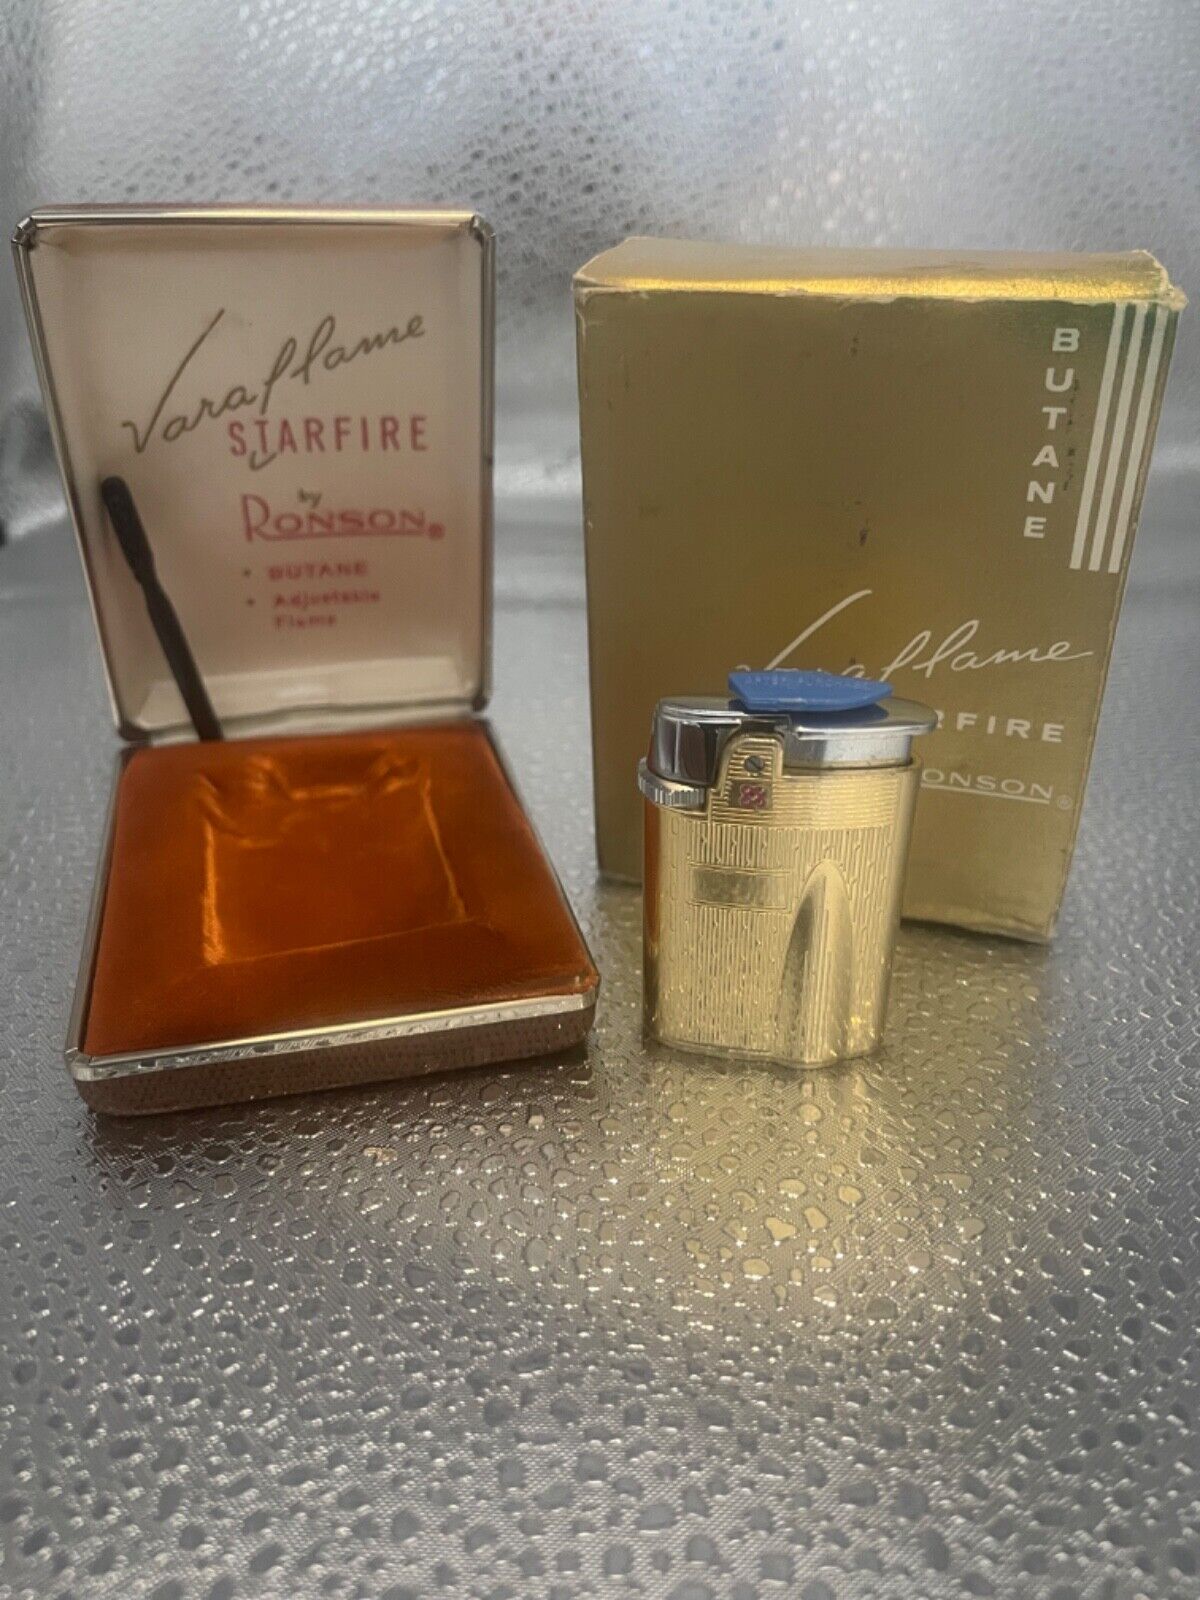 Vintage Ronson Varaflame lighter never been used in original box all instruction